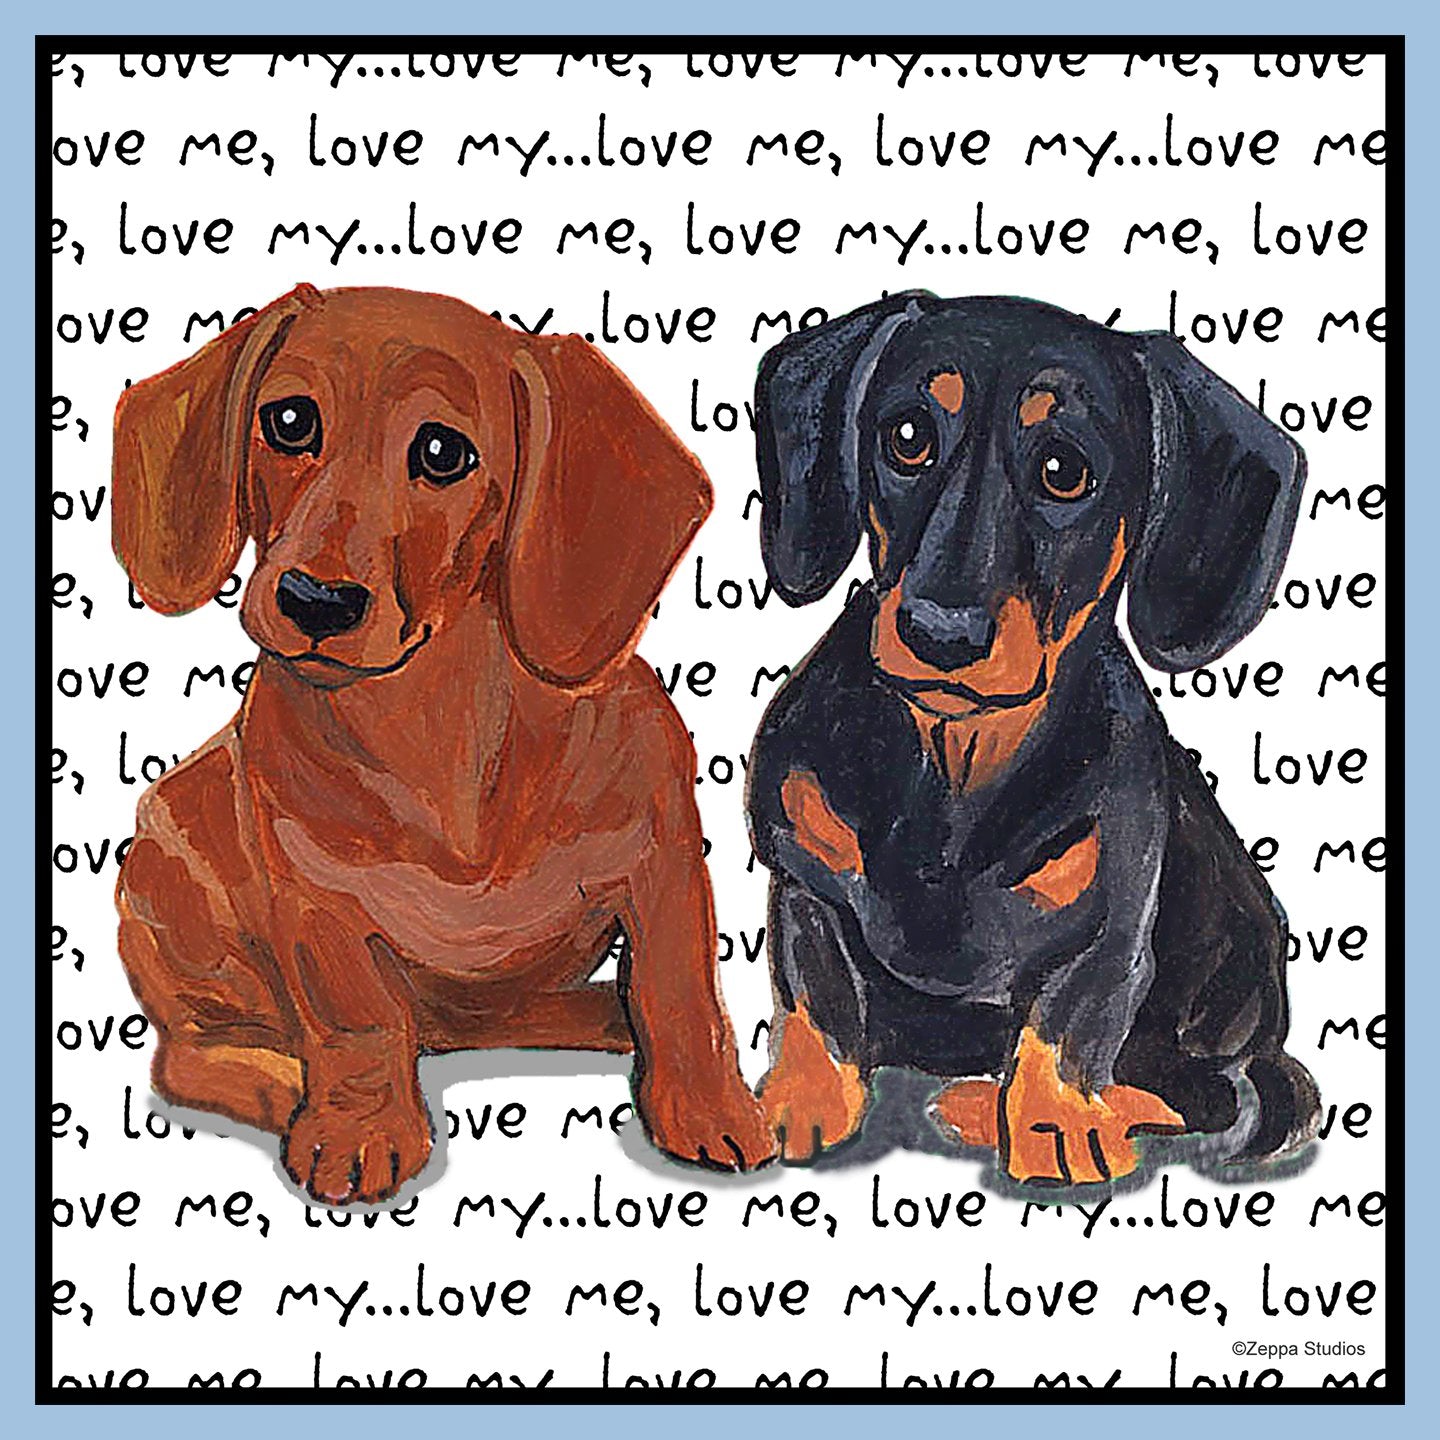 Dachshund Love Text - Women's Fitted T-Shirt